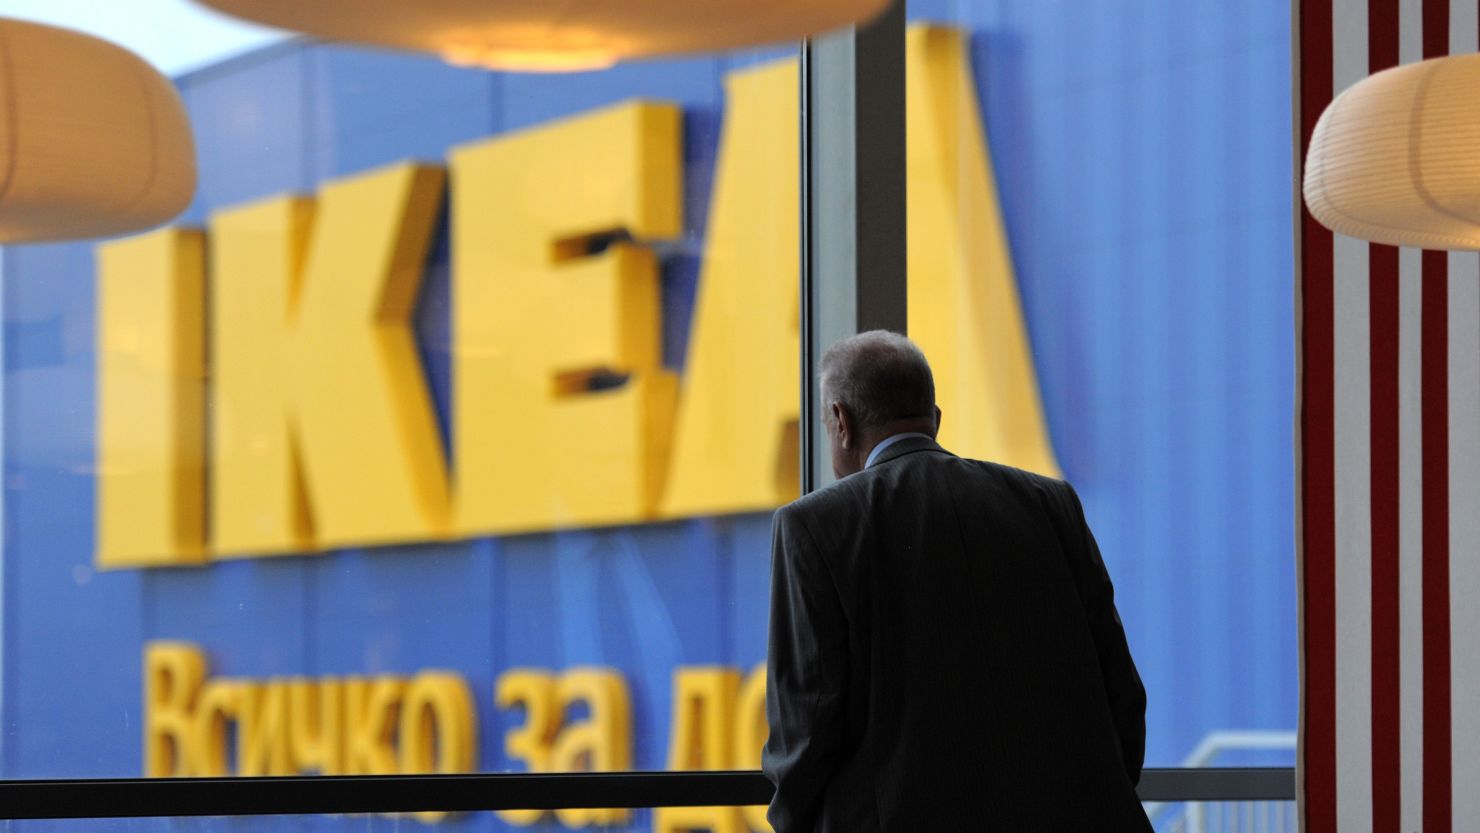 Ikea chief executive said it would be more open after a wave of scandals.